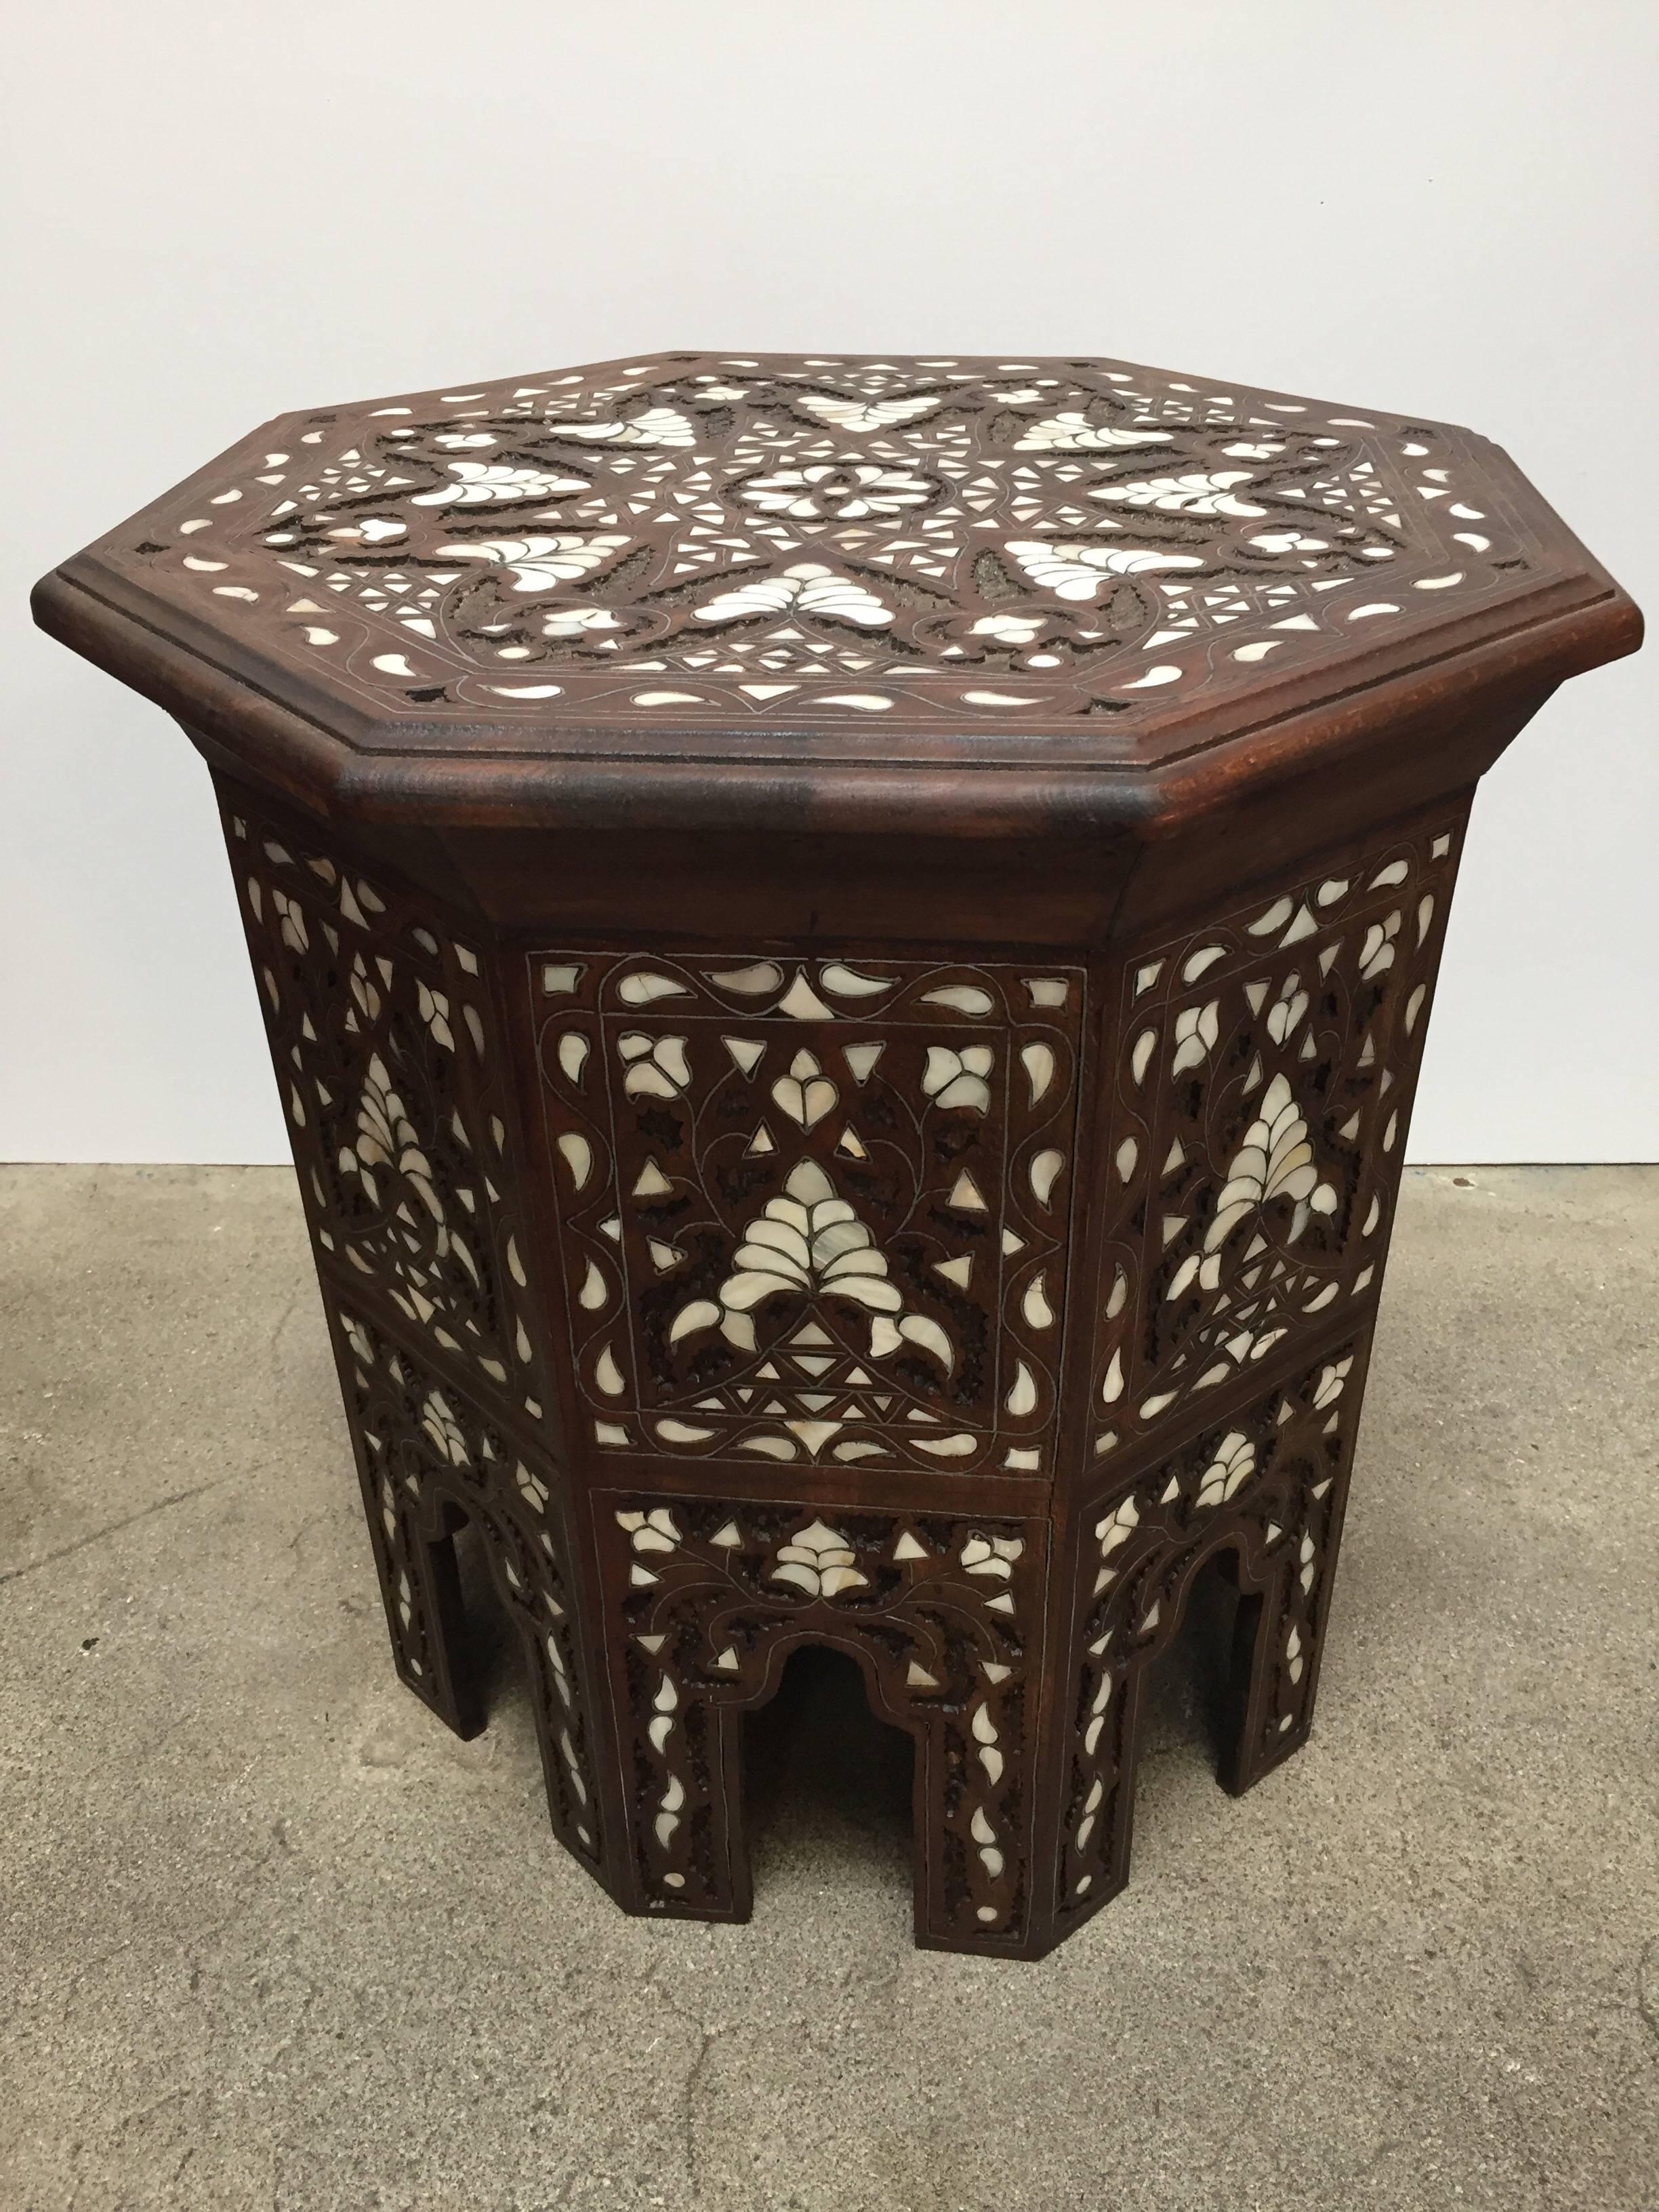 Hand-carved walnut octagonal Middle Eastern Syrian mother-of-pearl and silvered metal inlaid side tables.
Nicely decorated with Moroccan Moorish arches and ottoman floral designs.
A pair is available, price is for one.